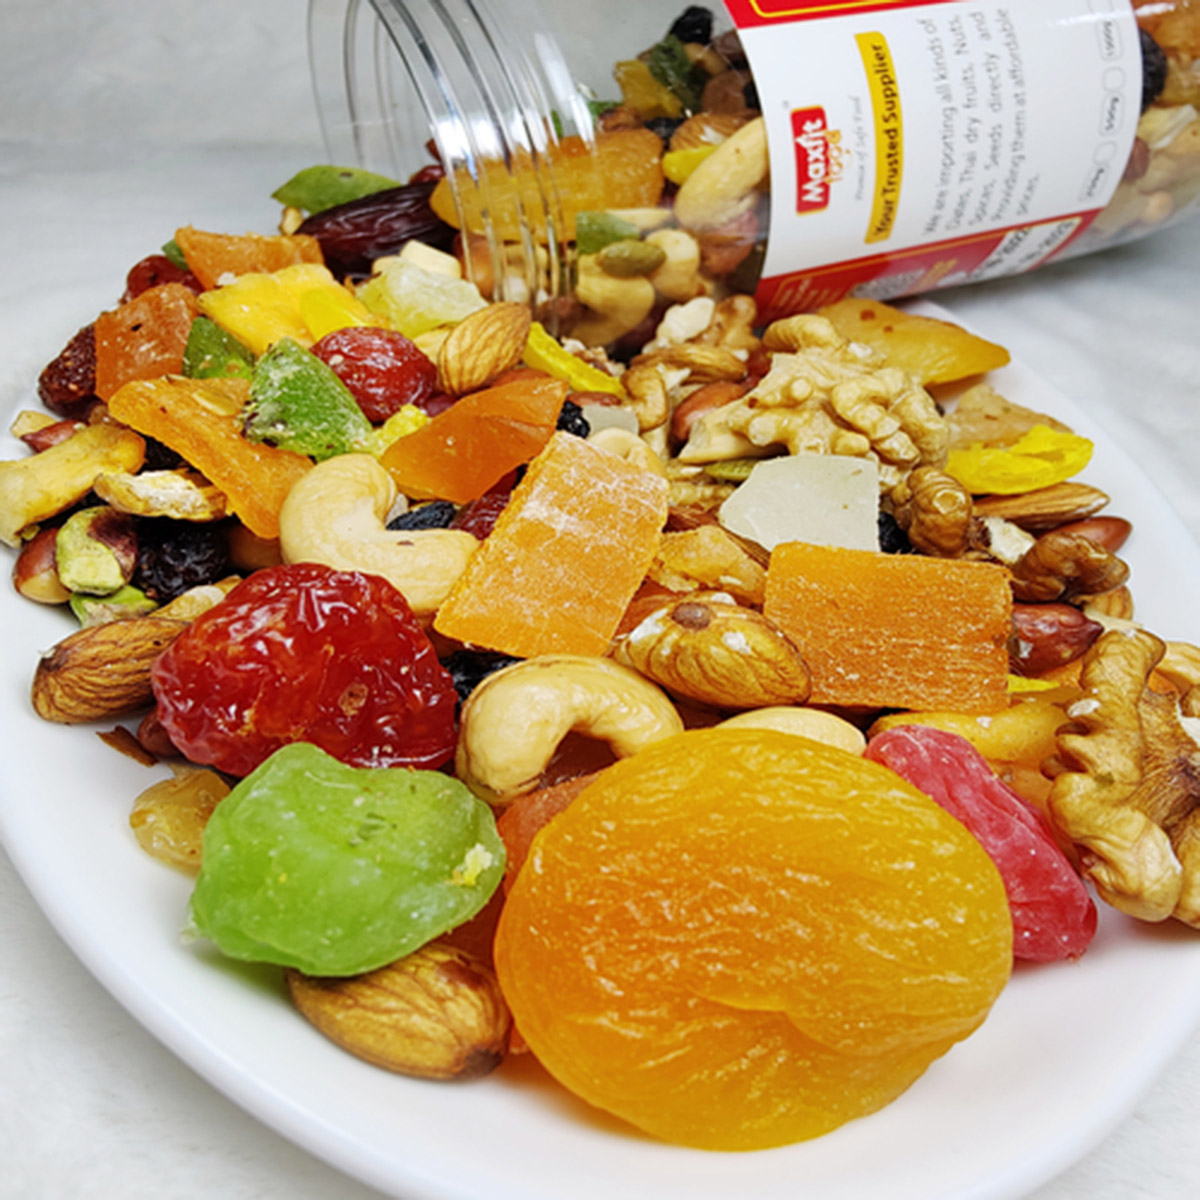 Premium Quality 35 Items Mixed With Dried Fruits 500G